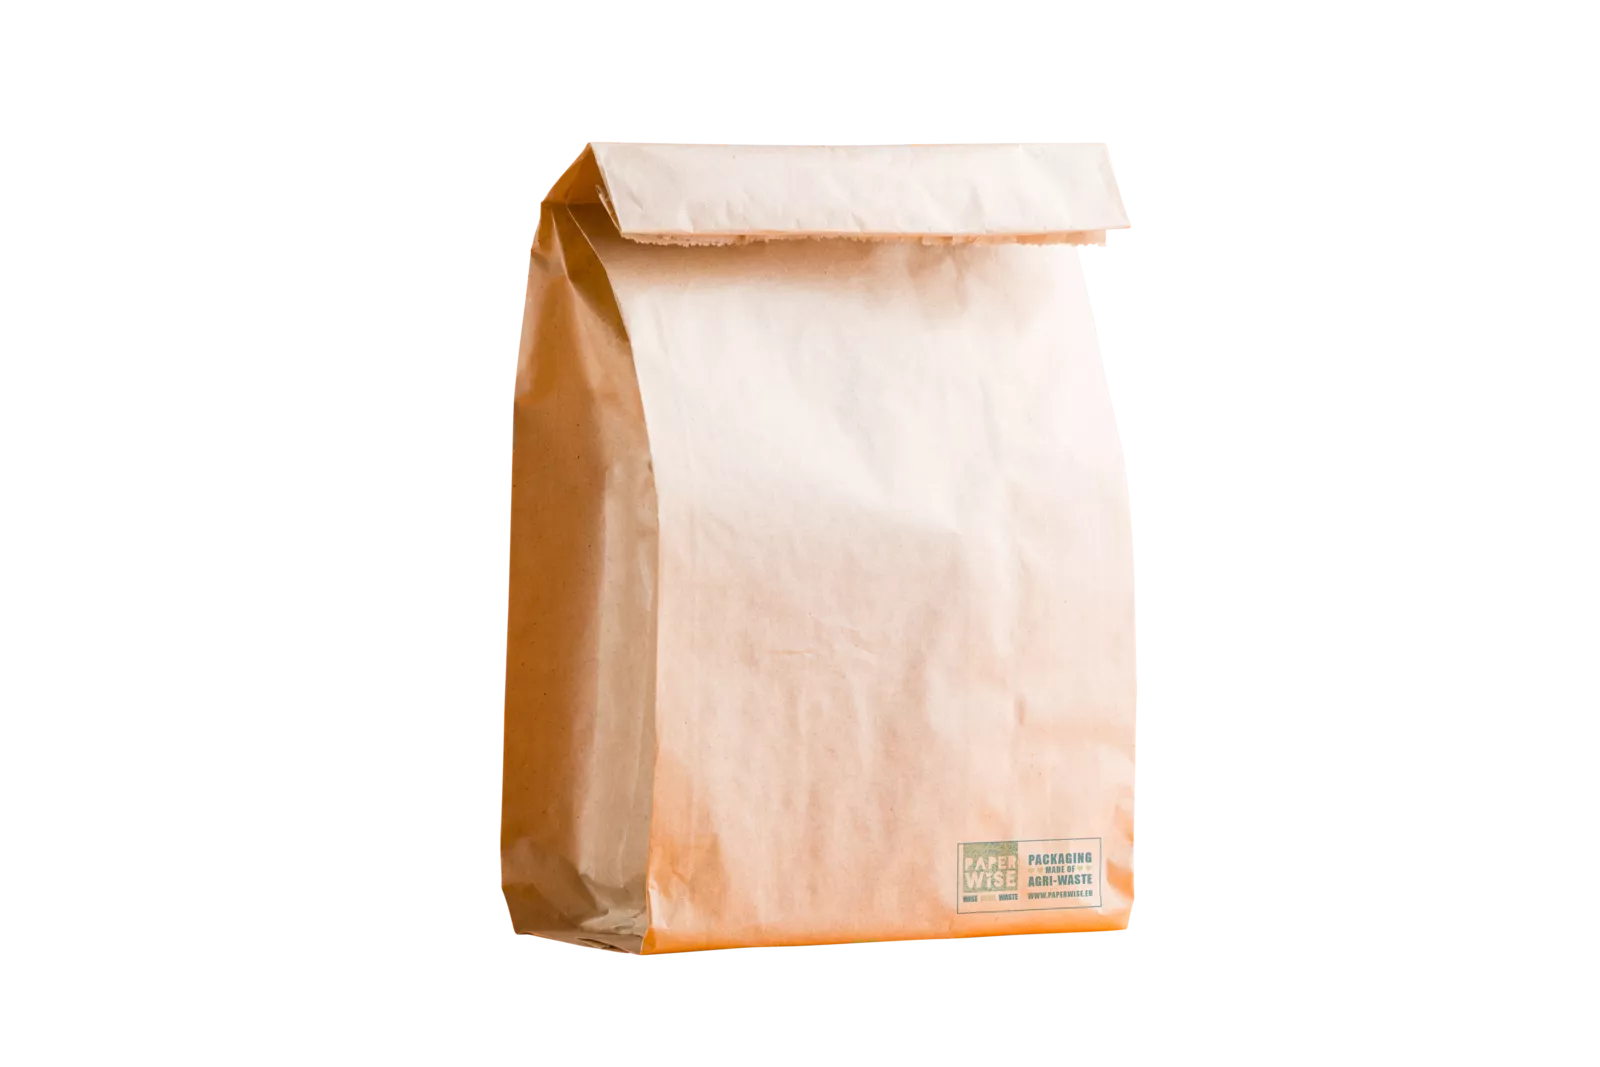 PaperWise eco friendly paper bread bag natural windowbag compostable recycable packaging multipapiersansfin5c